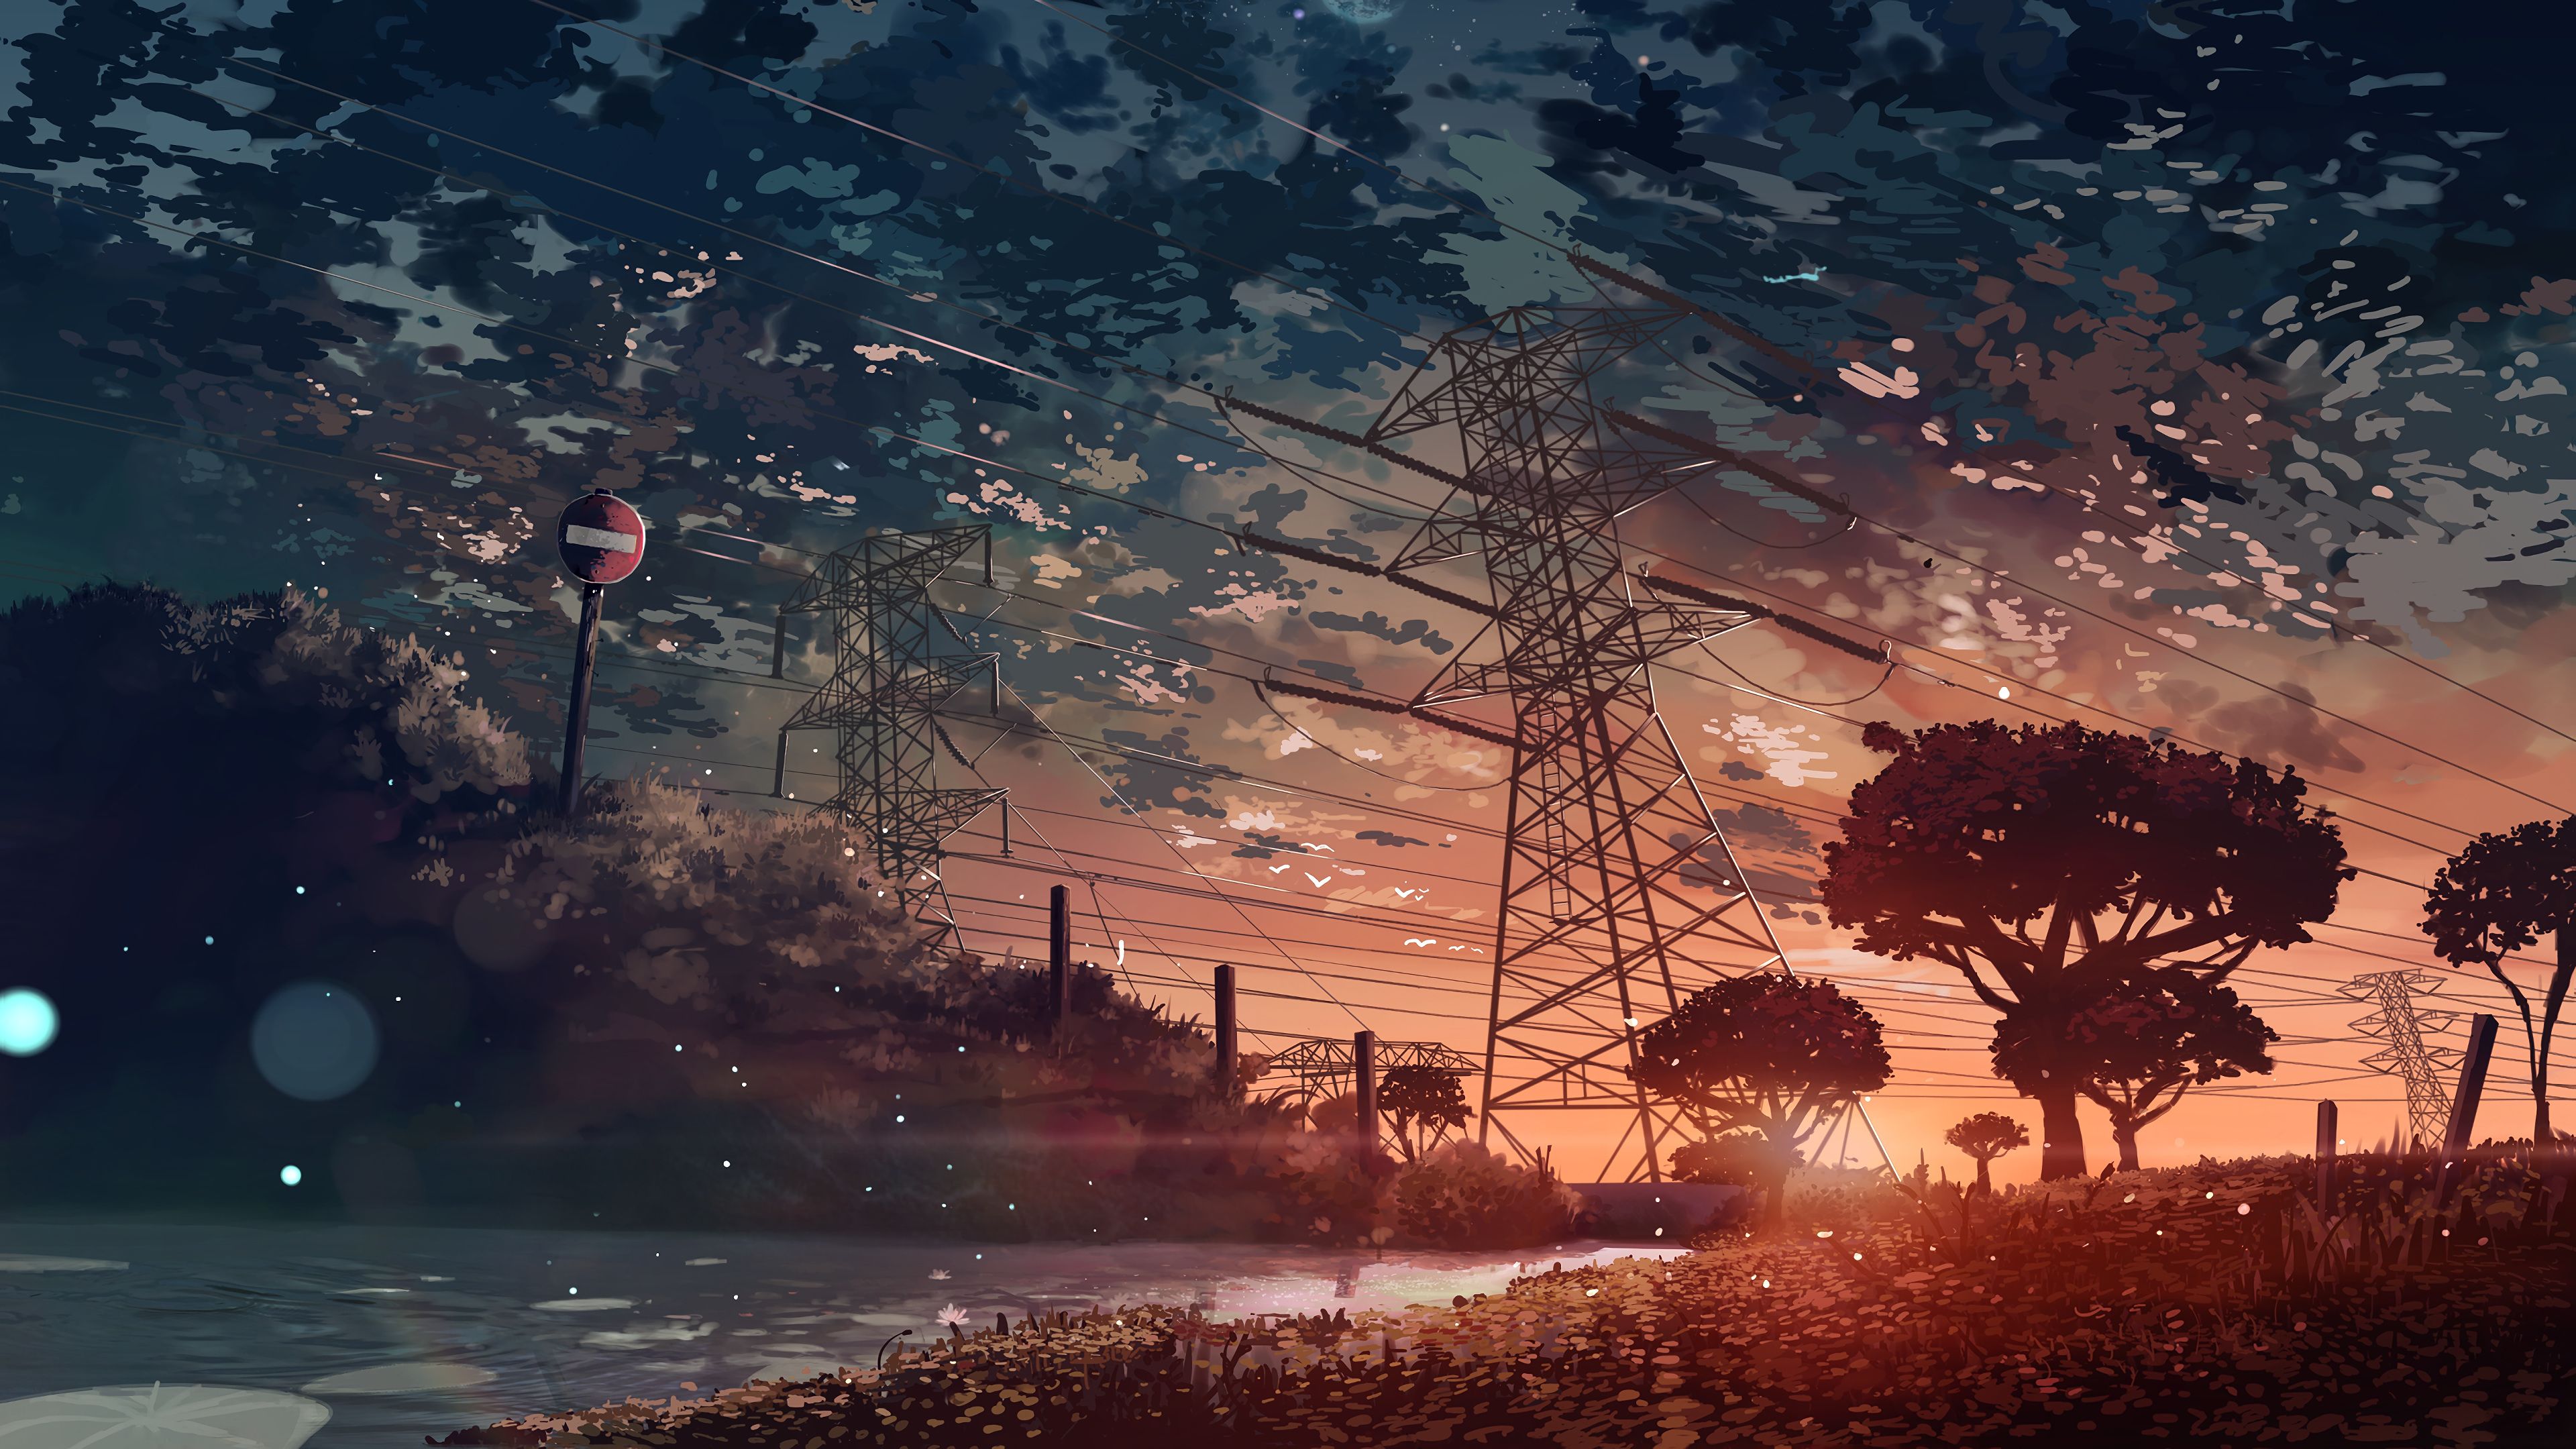 A painting of trees and water with the sun setting - Anime sunset, anime landscape